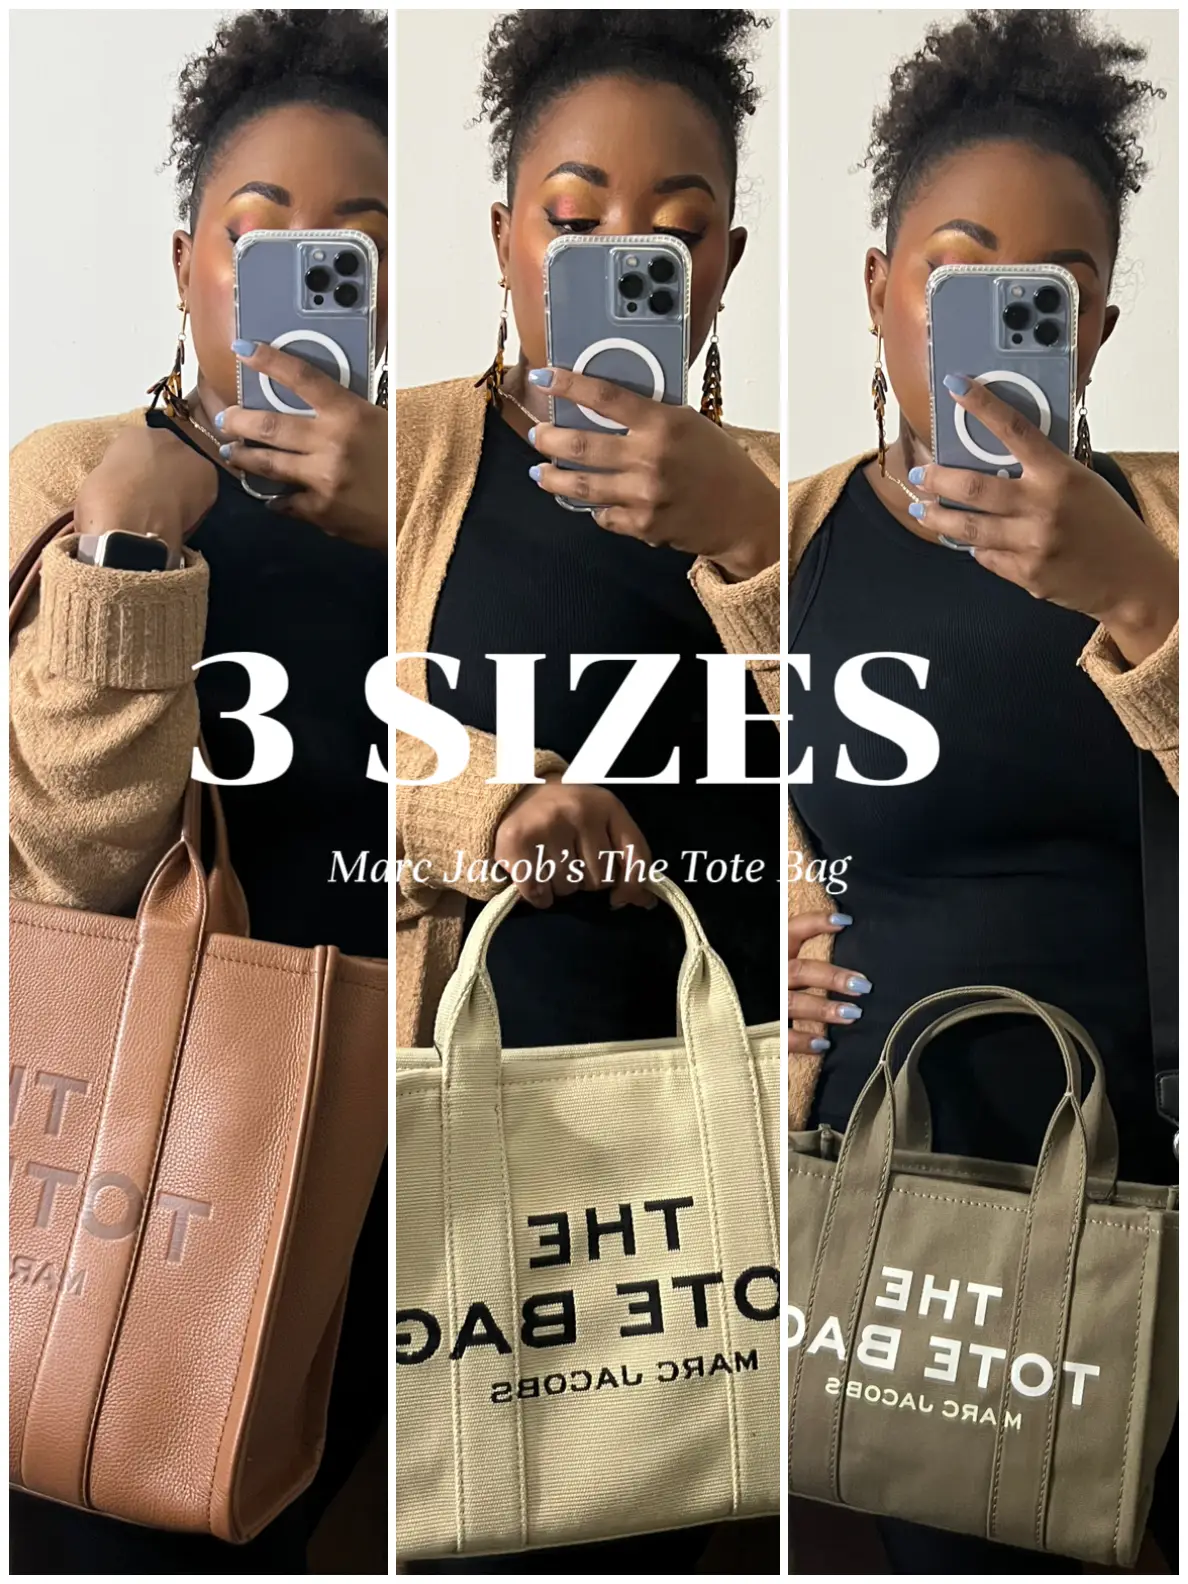 First impression of Marc Jacobs small leather tote